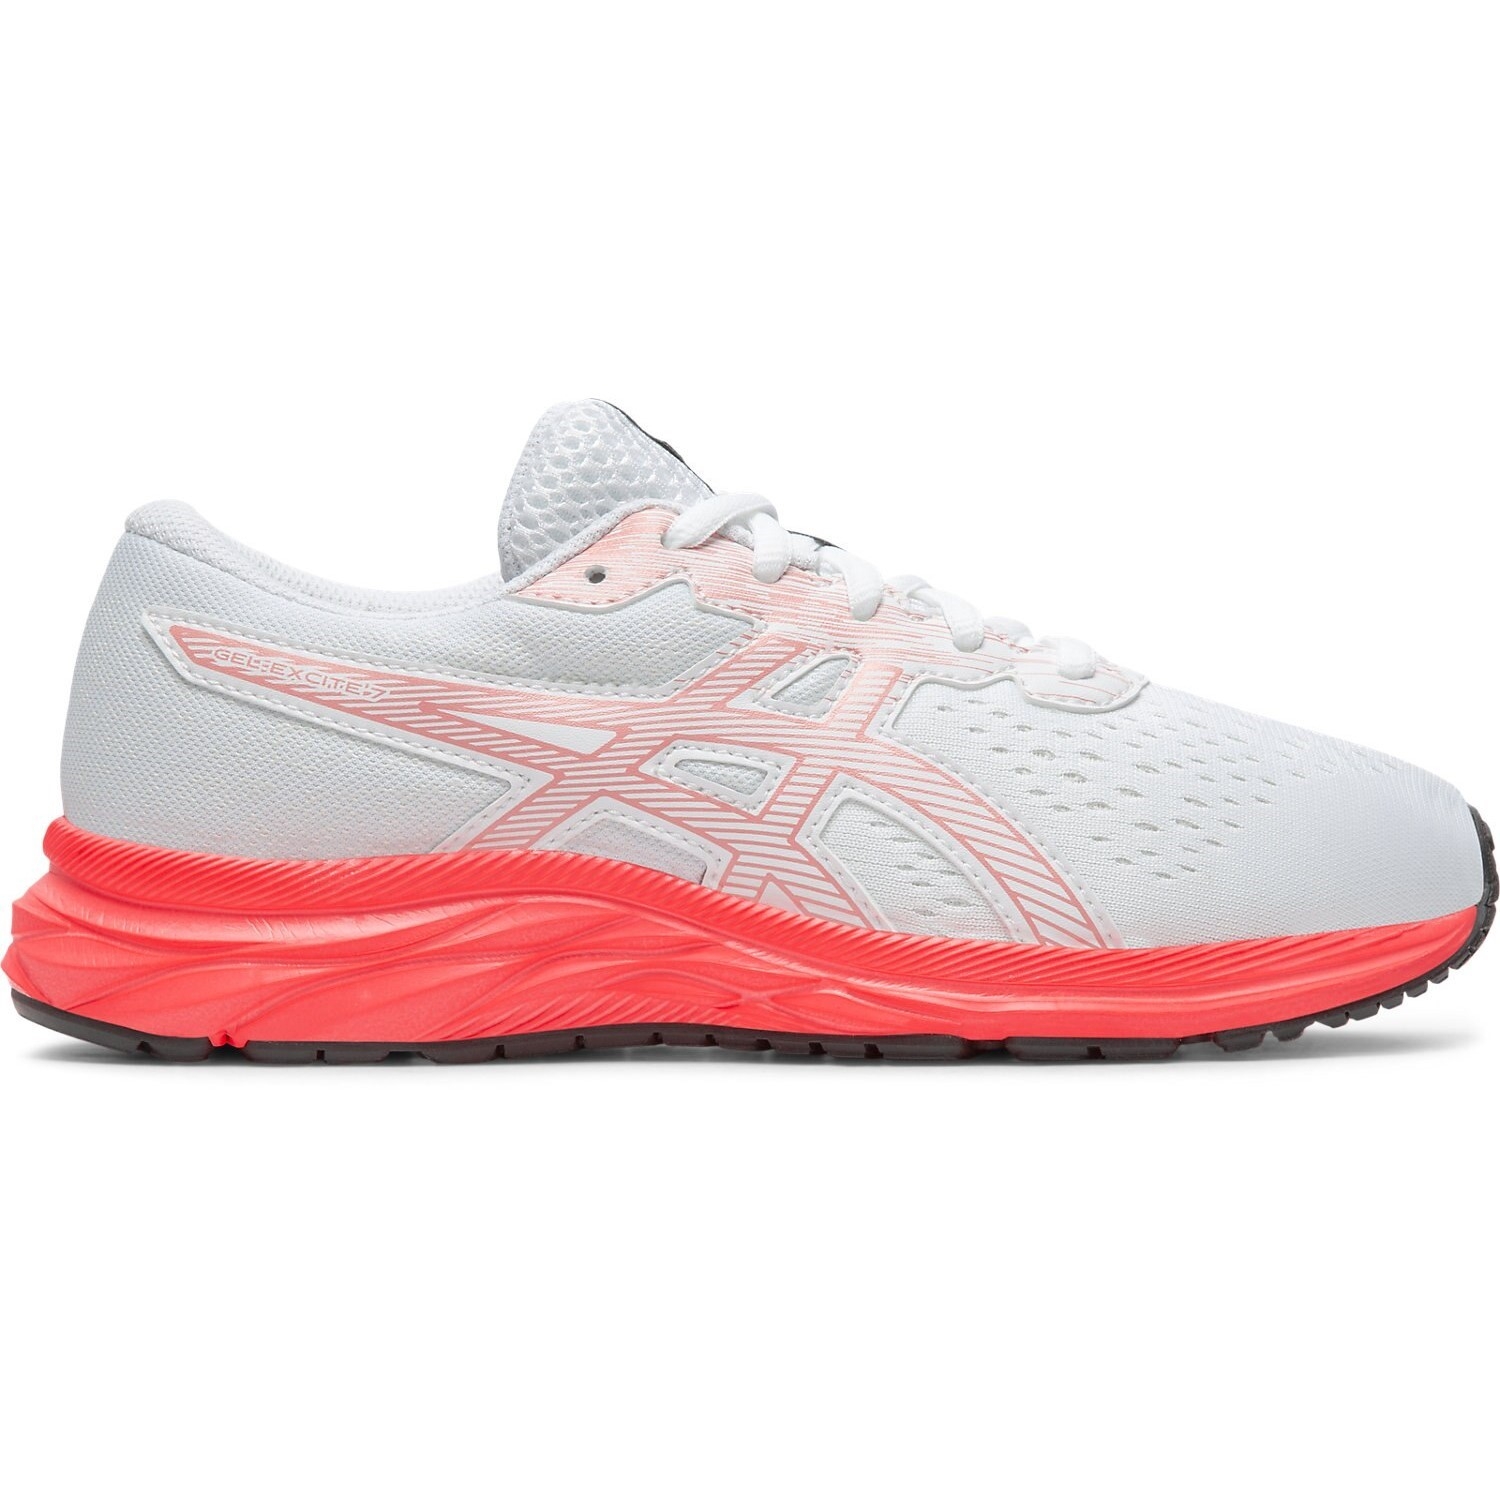 Asics Gel-Excite 7 GS Girls Running Shoes: White/Rose Gold | Mike Pawley  Sports